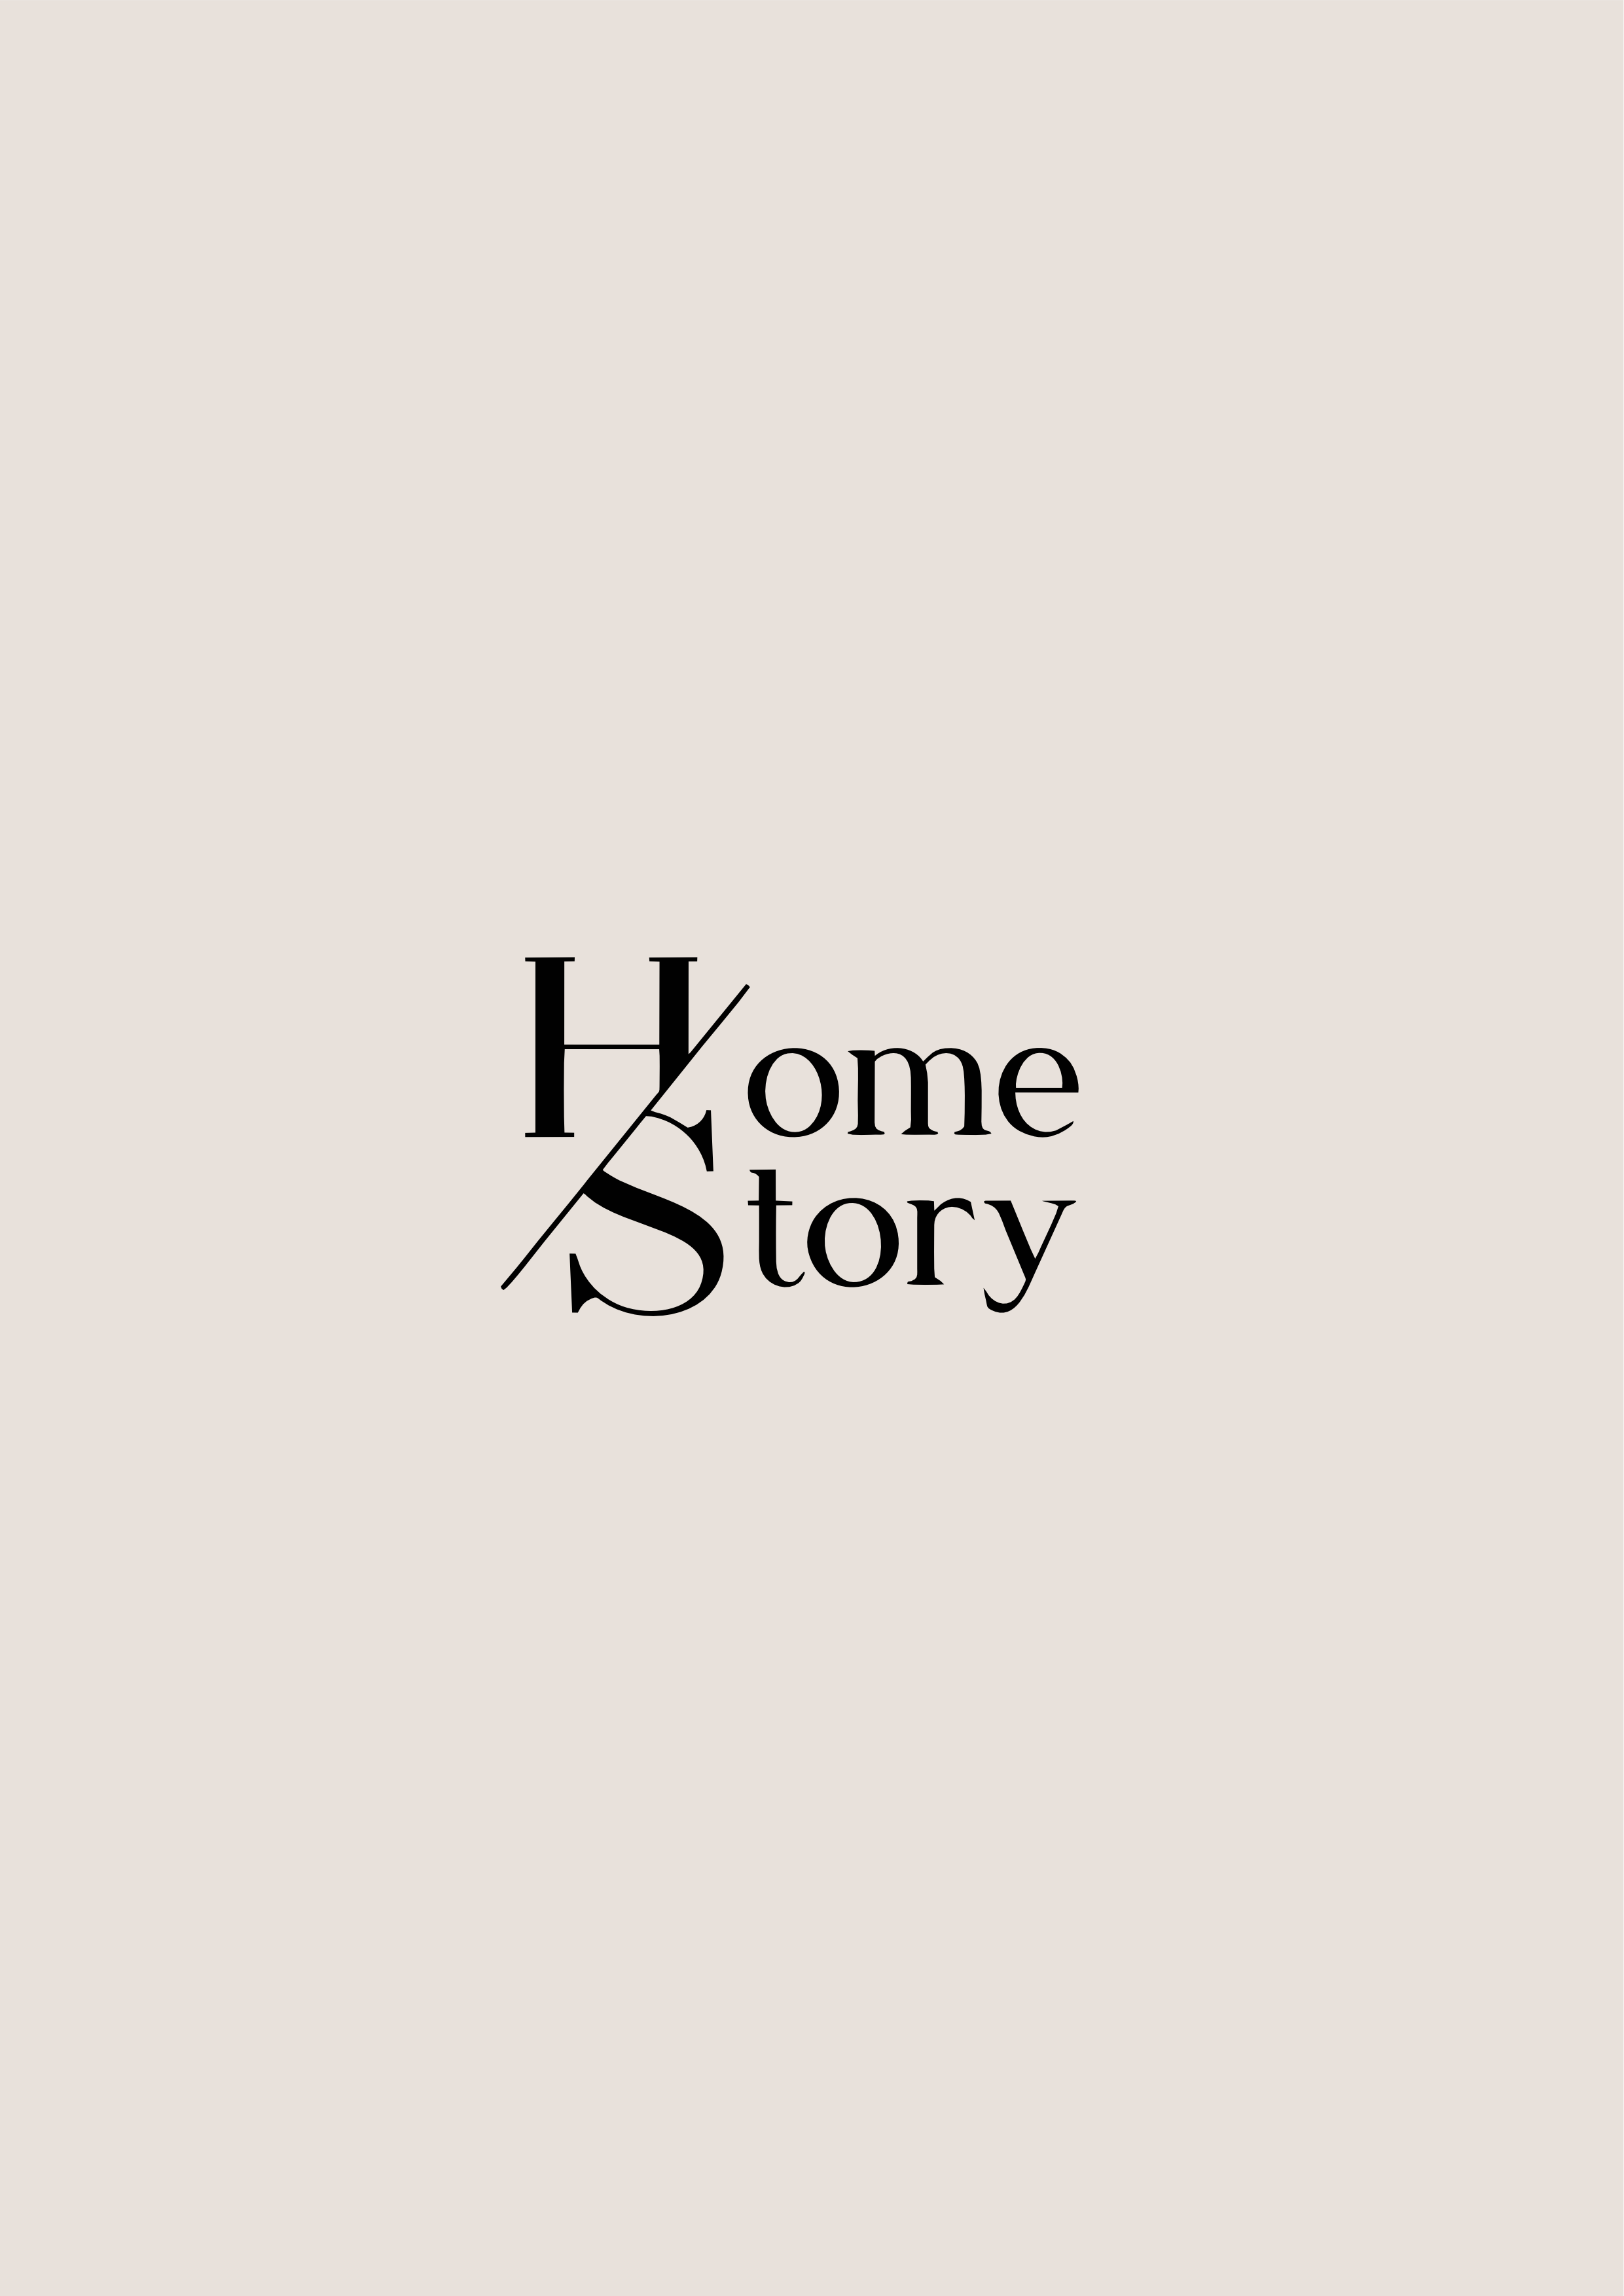 Home Story Image